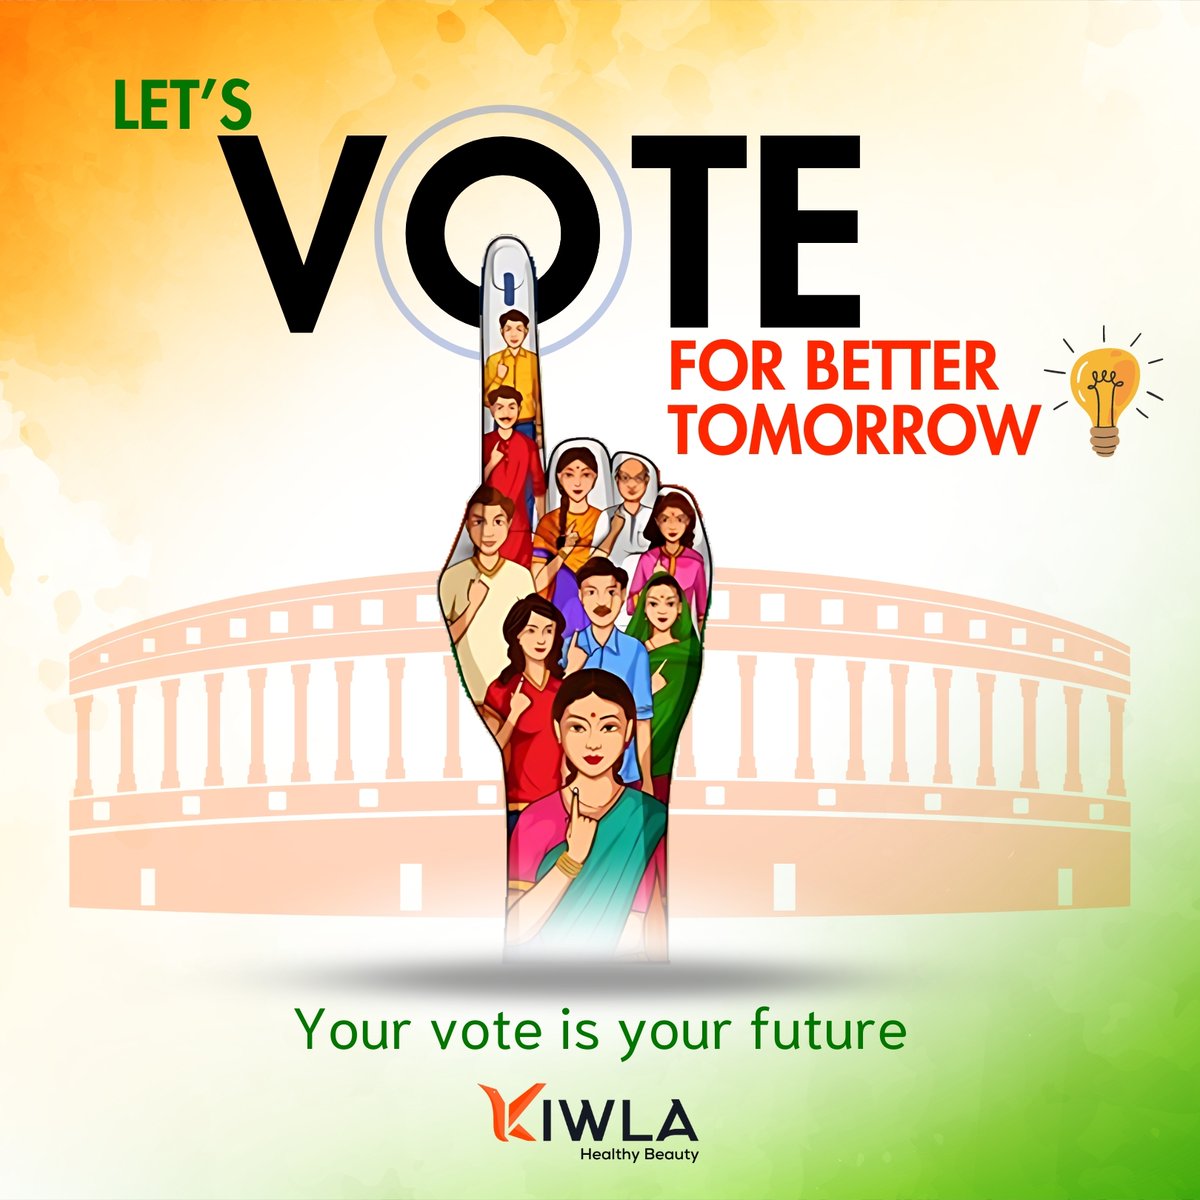 Your vote makes all the difference in the society- Let's Vote. #Vote2024 #BeAProudVoter #IVote4Sure #Letsvote #Elections2024 #MyVoteMyRight #EachVoteMatters #LokSabhaElection2024 #2024elections #Beauty #cosmetics #healthandwellness #thekiwla #welovekiwla #healthybeauty @thekiwla